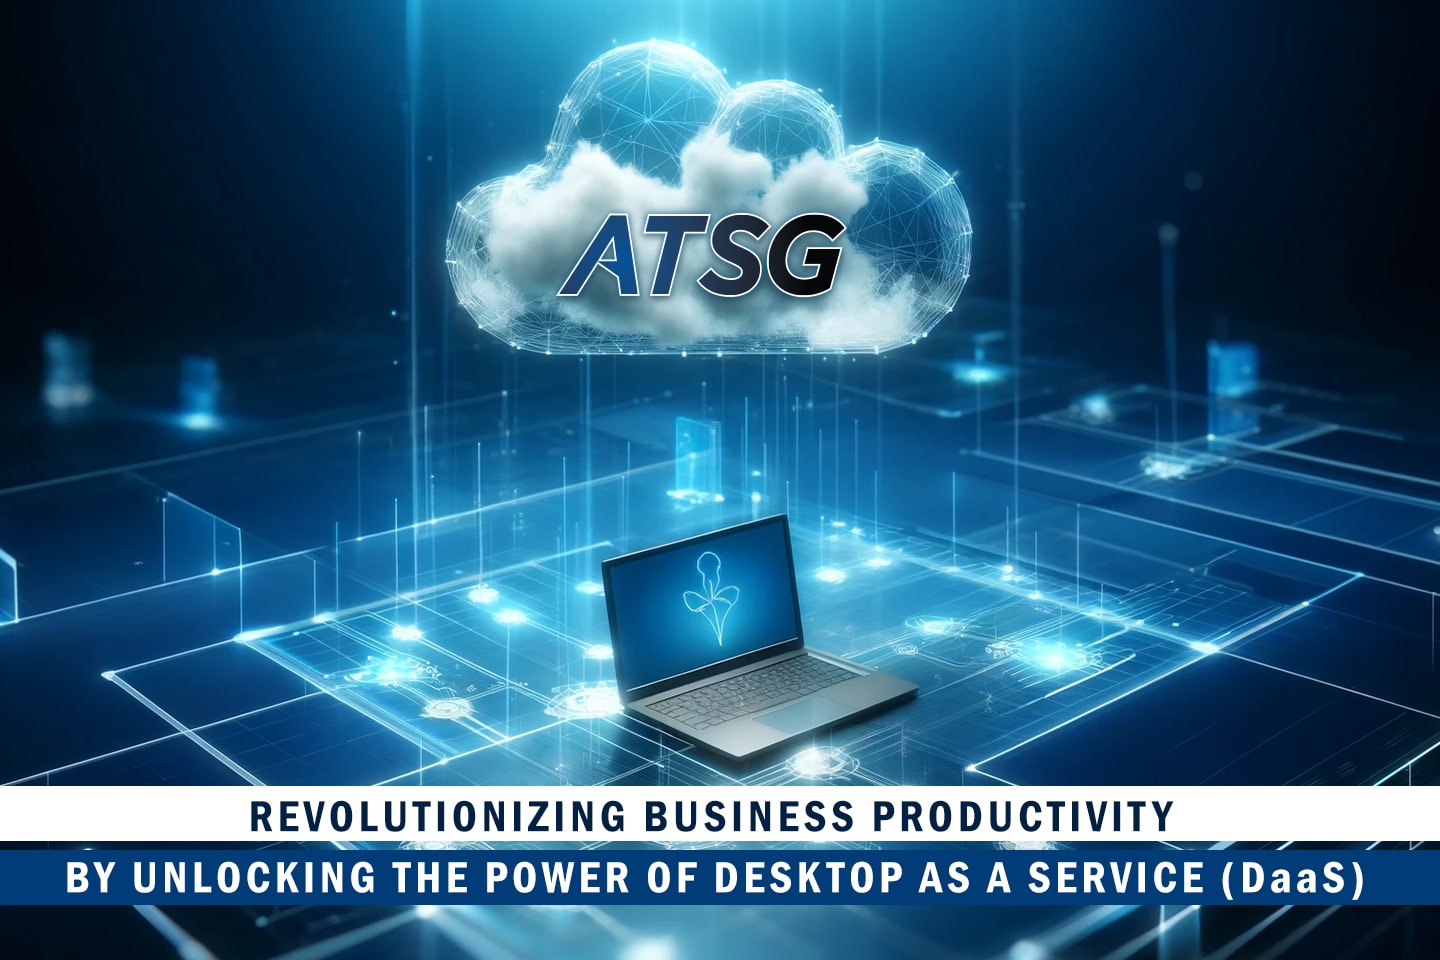 Revolutionizing-Business-Productivity-by-Unlocking-the-Power-of-Desktop-as-a-Service-Featured